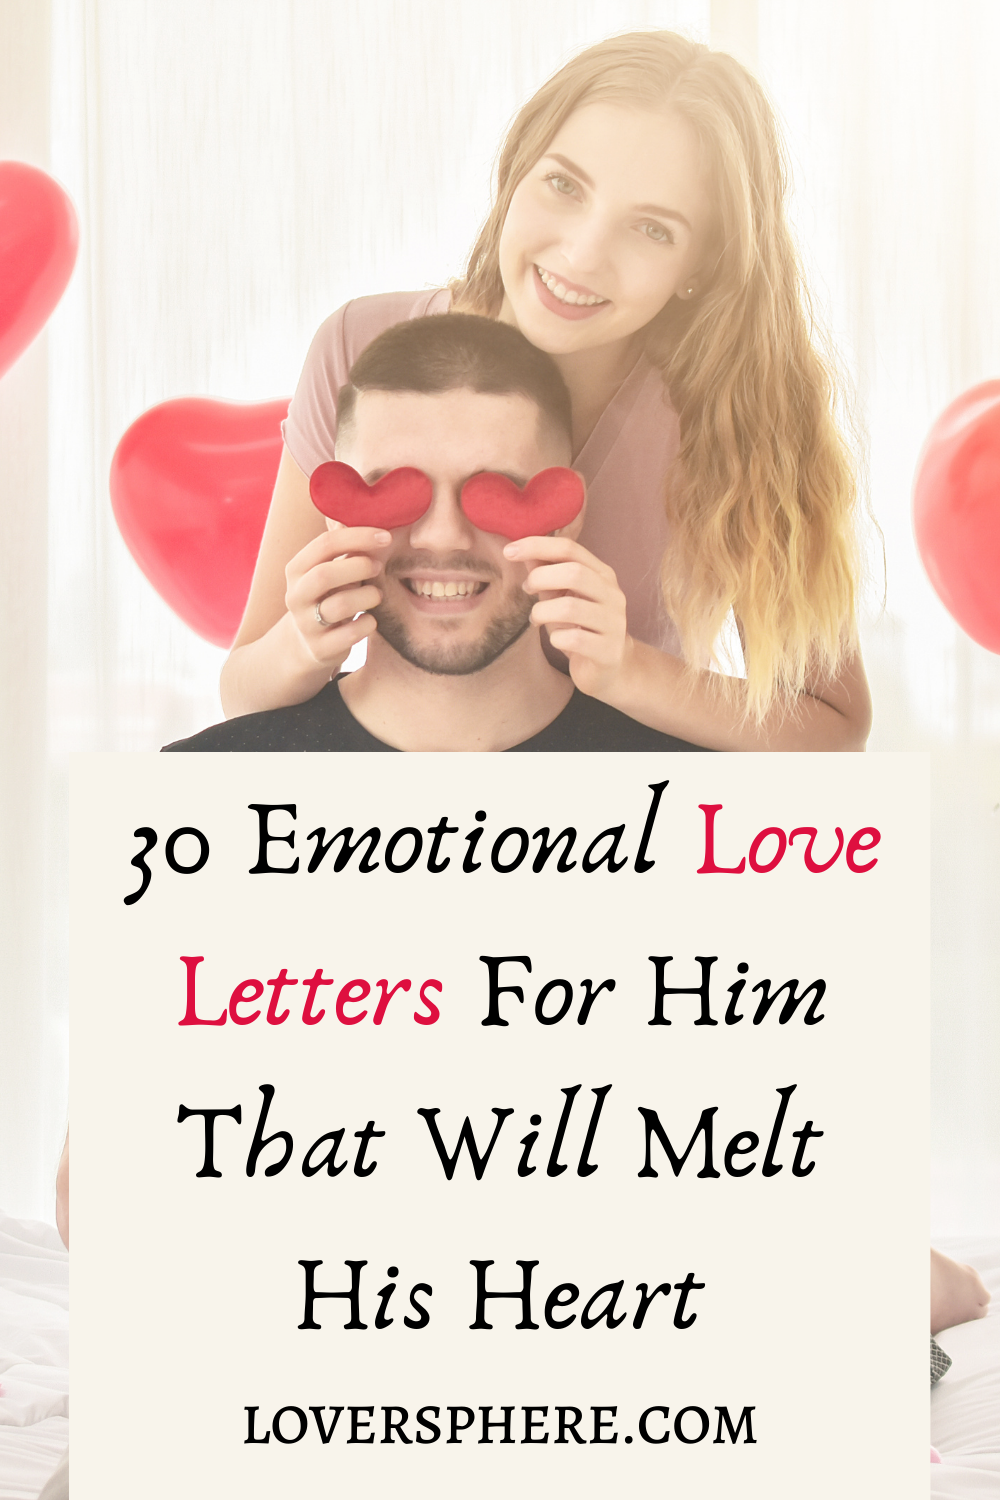 Romantic letters for her